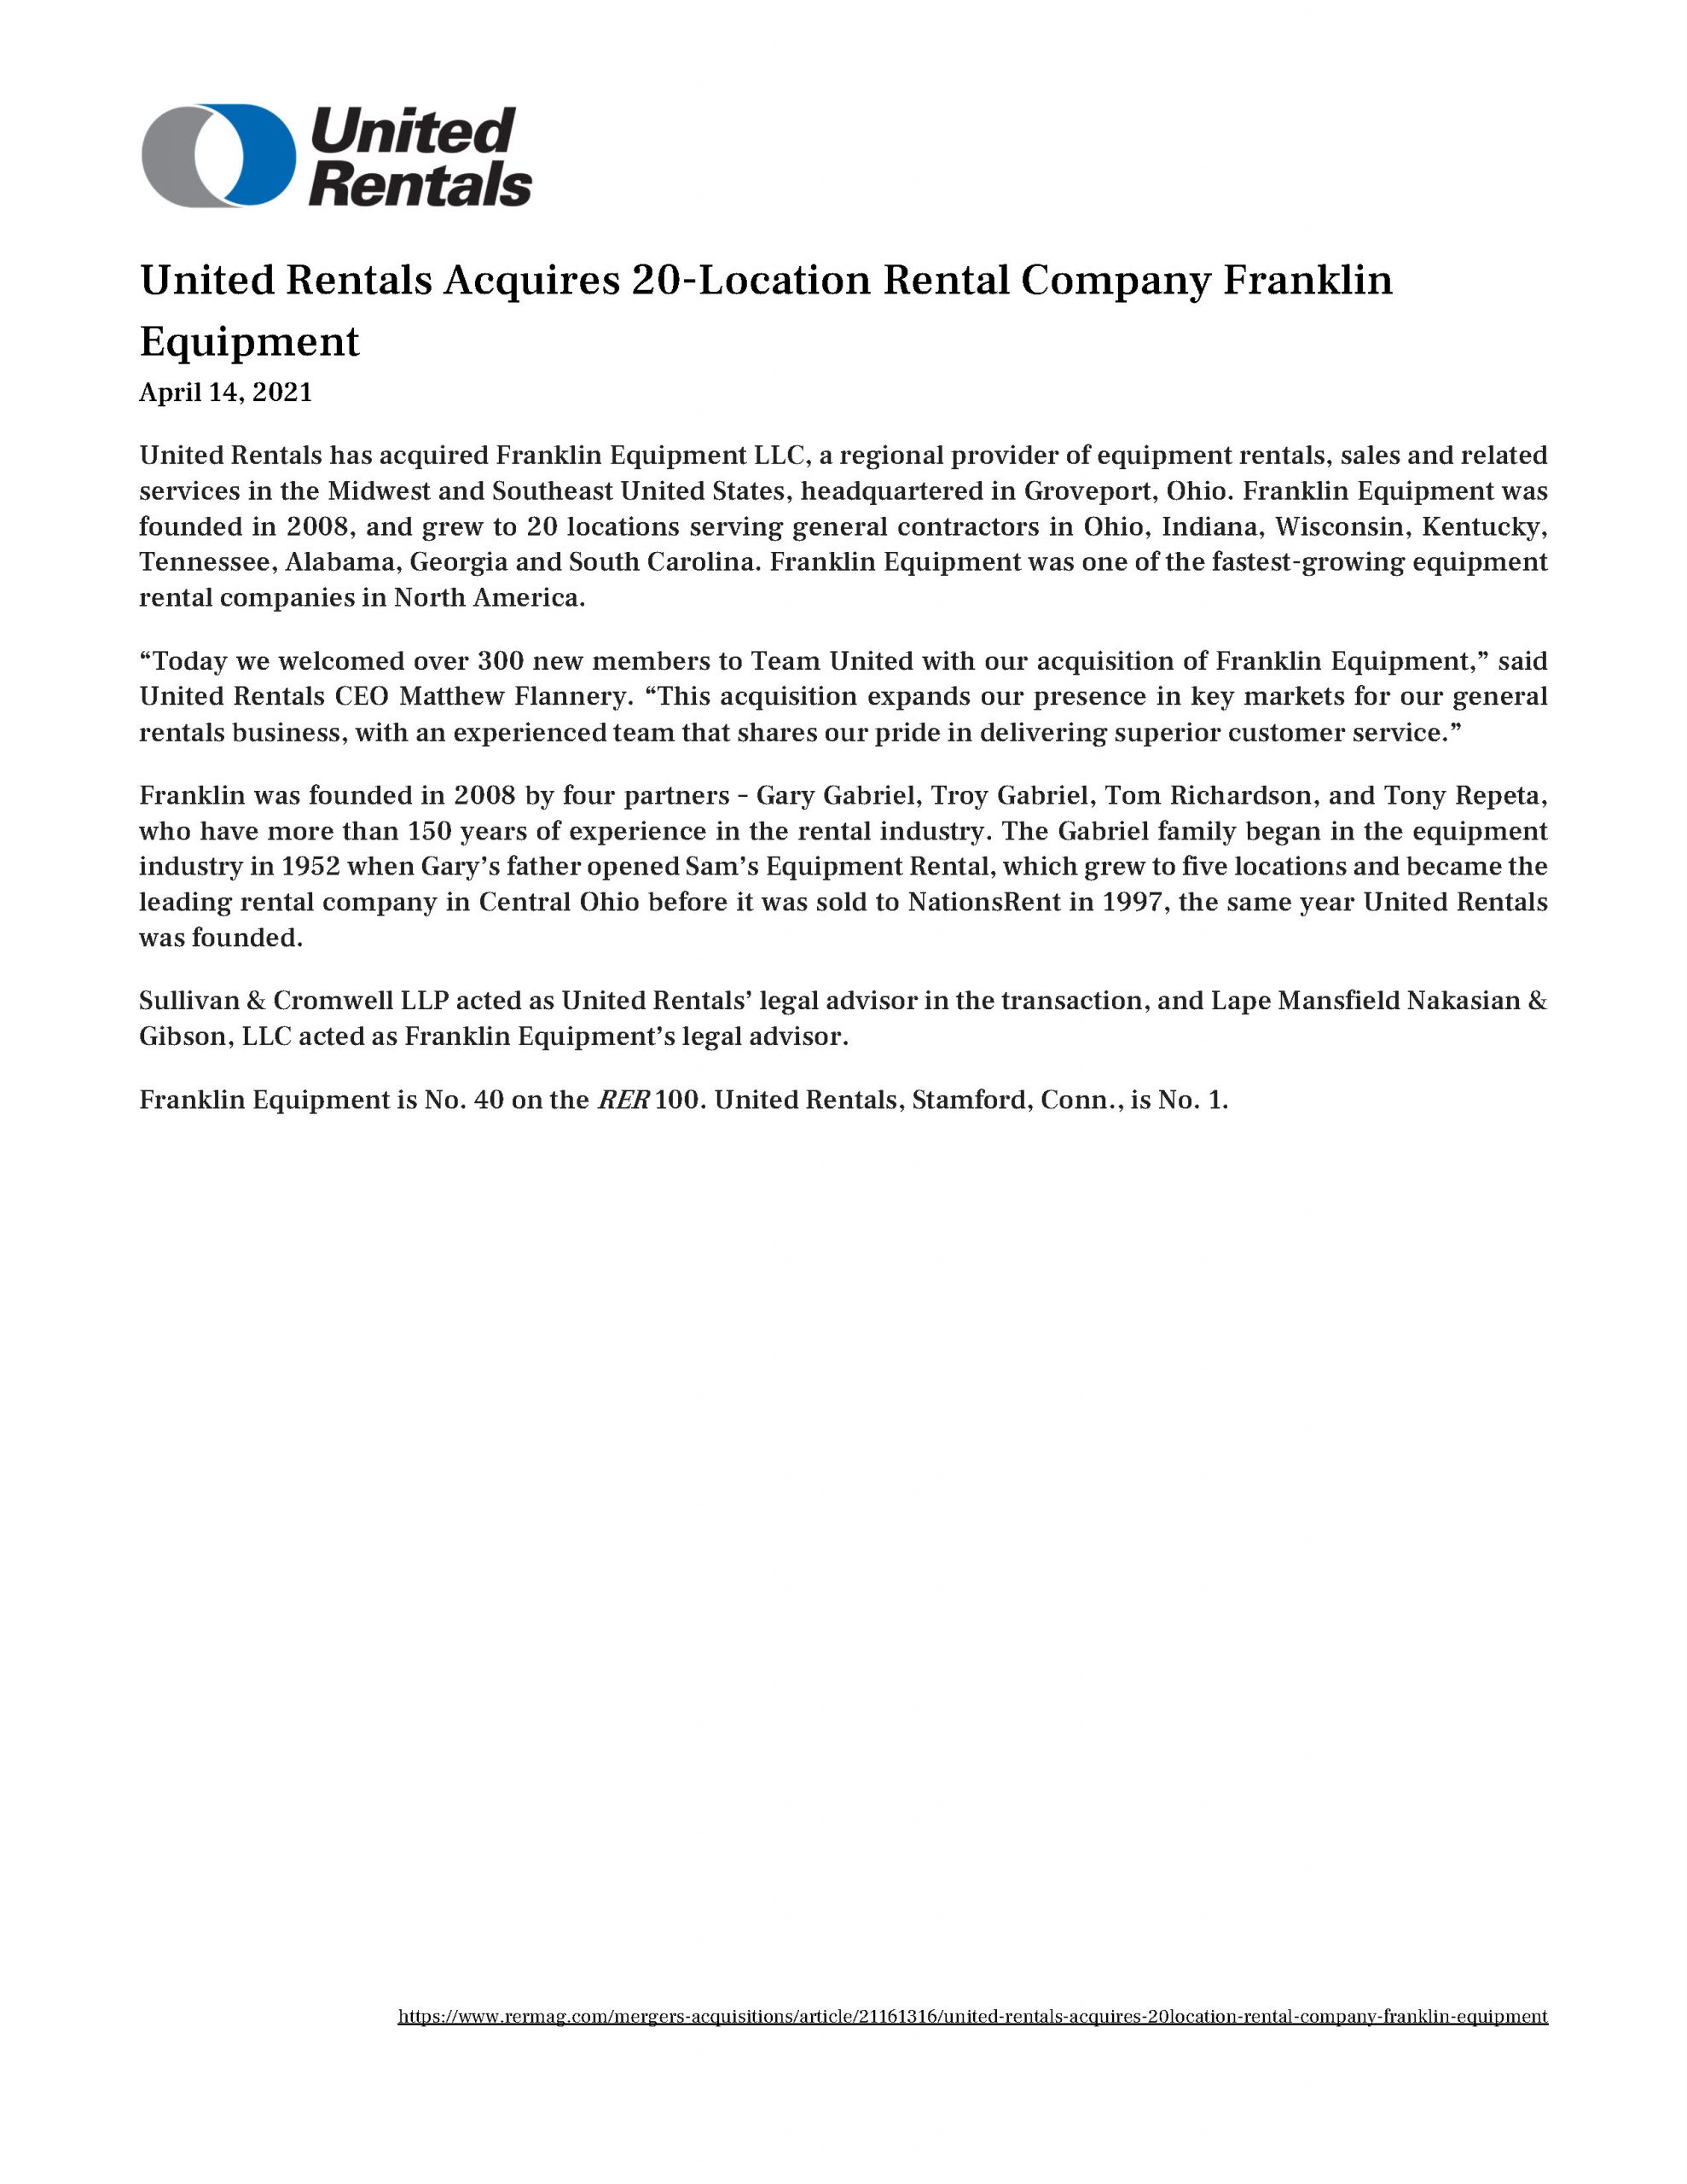 United Rentals Acquires 20-Location Rental Company Franklin Equipment 4.14.2021_Page_1